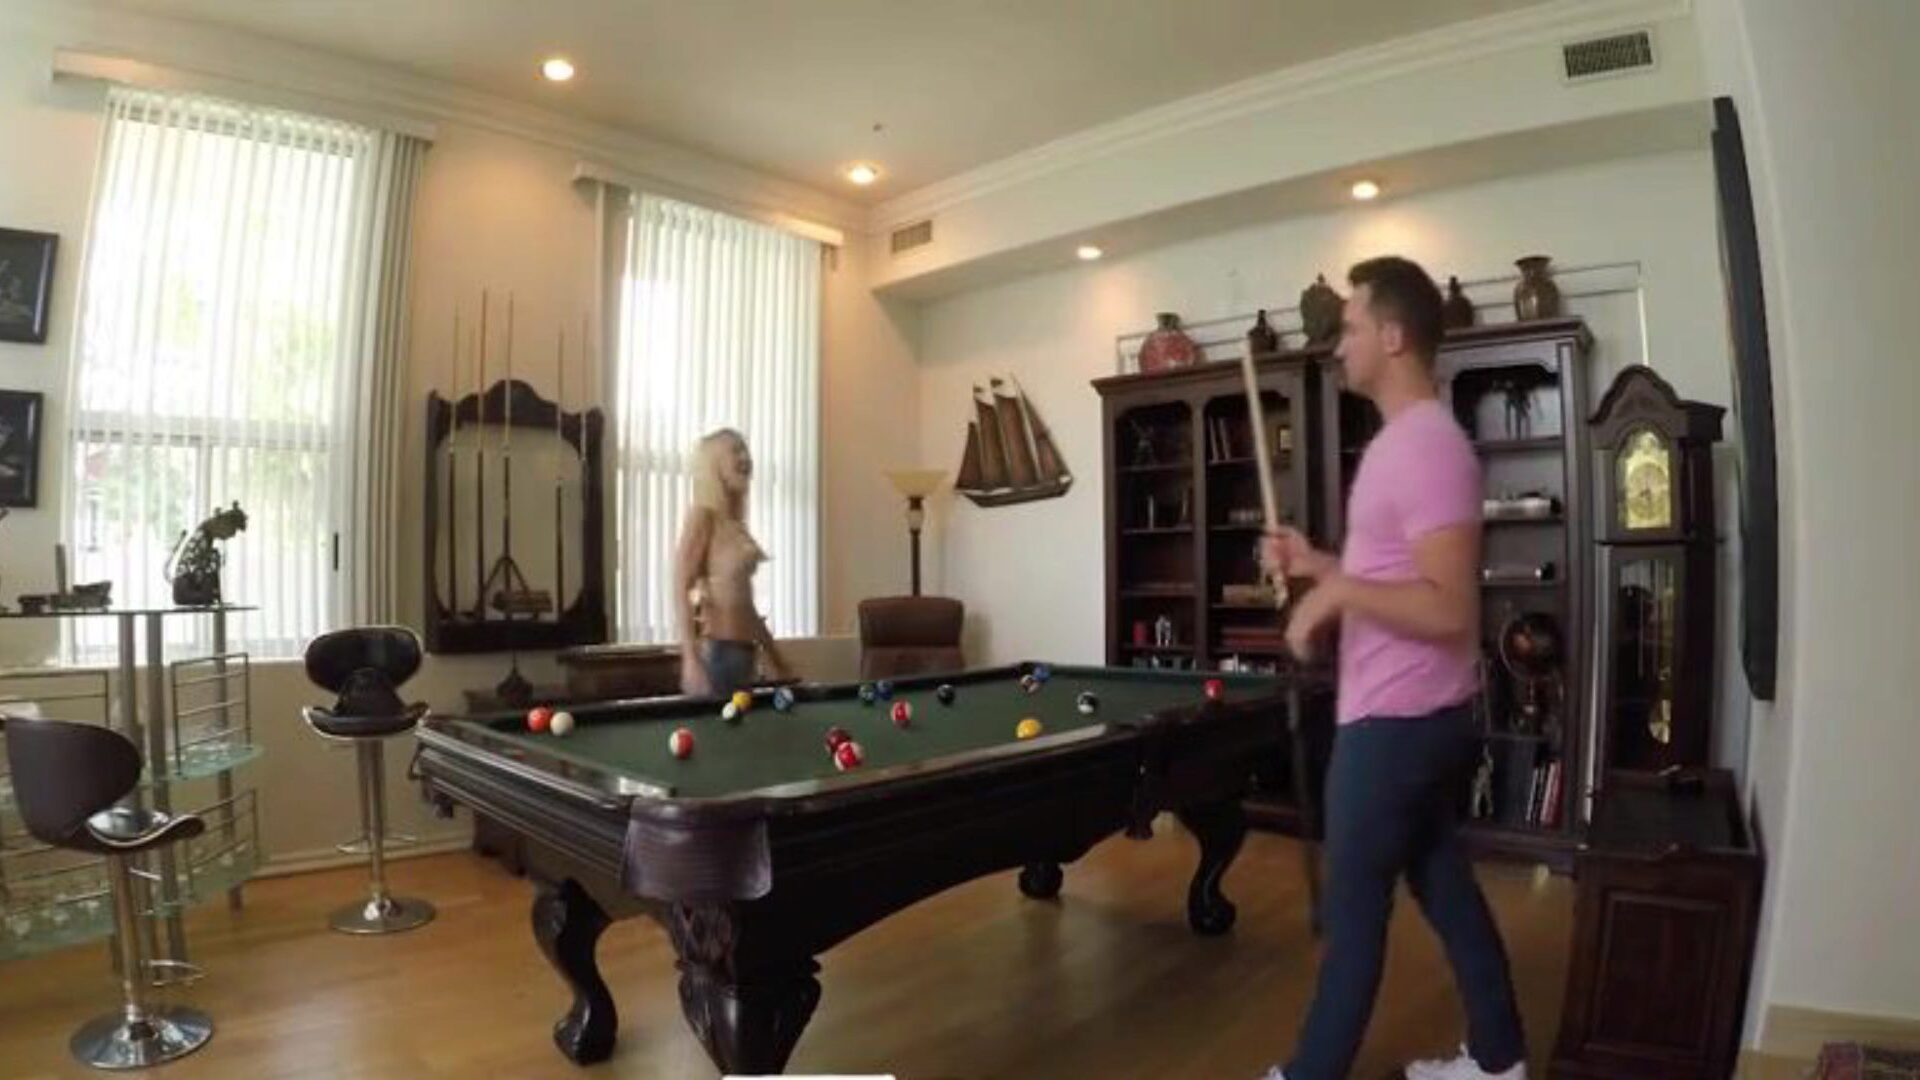 SpyFam Golden-Haired step-mom Laura Bentley copulates sonnie on pool table